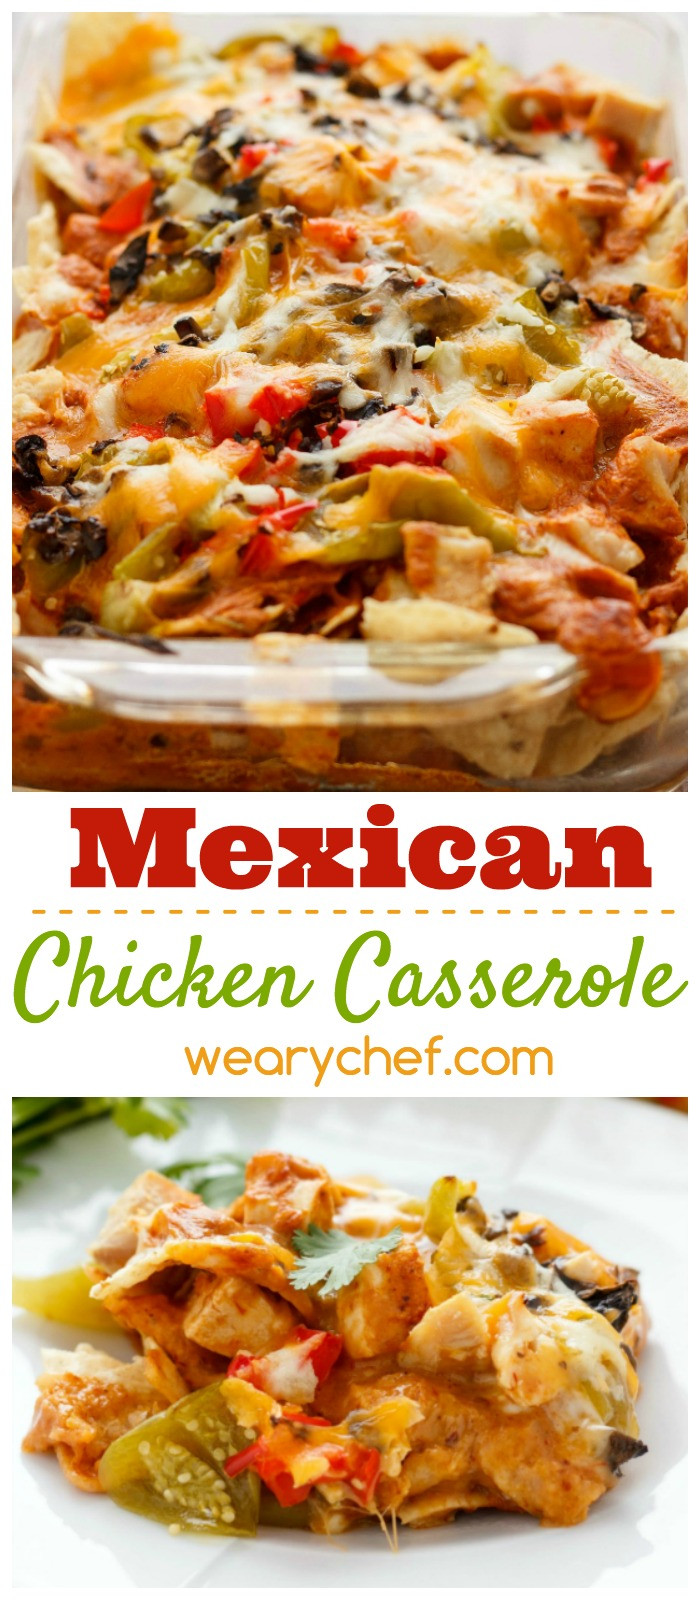 Mexican Chicken Casserole Recipe
 Mexican Chicken Casserole with Tortilla Chips The Weary Chef